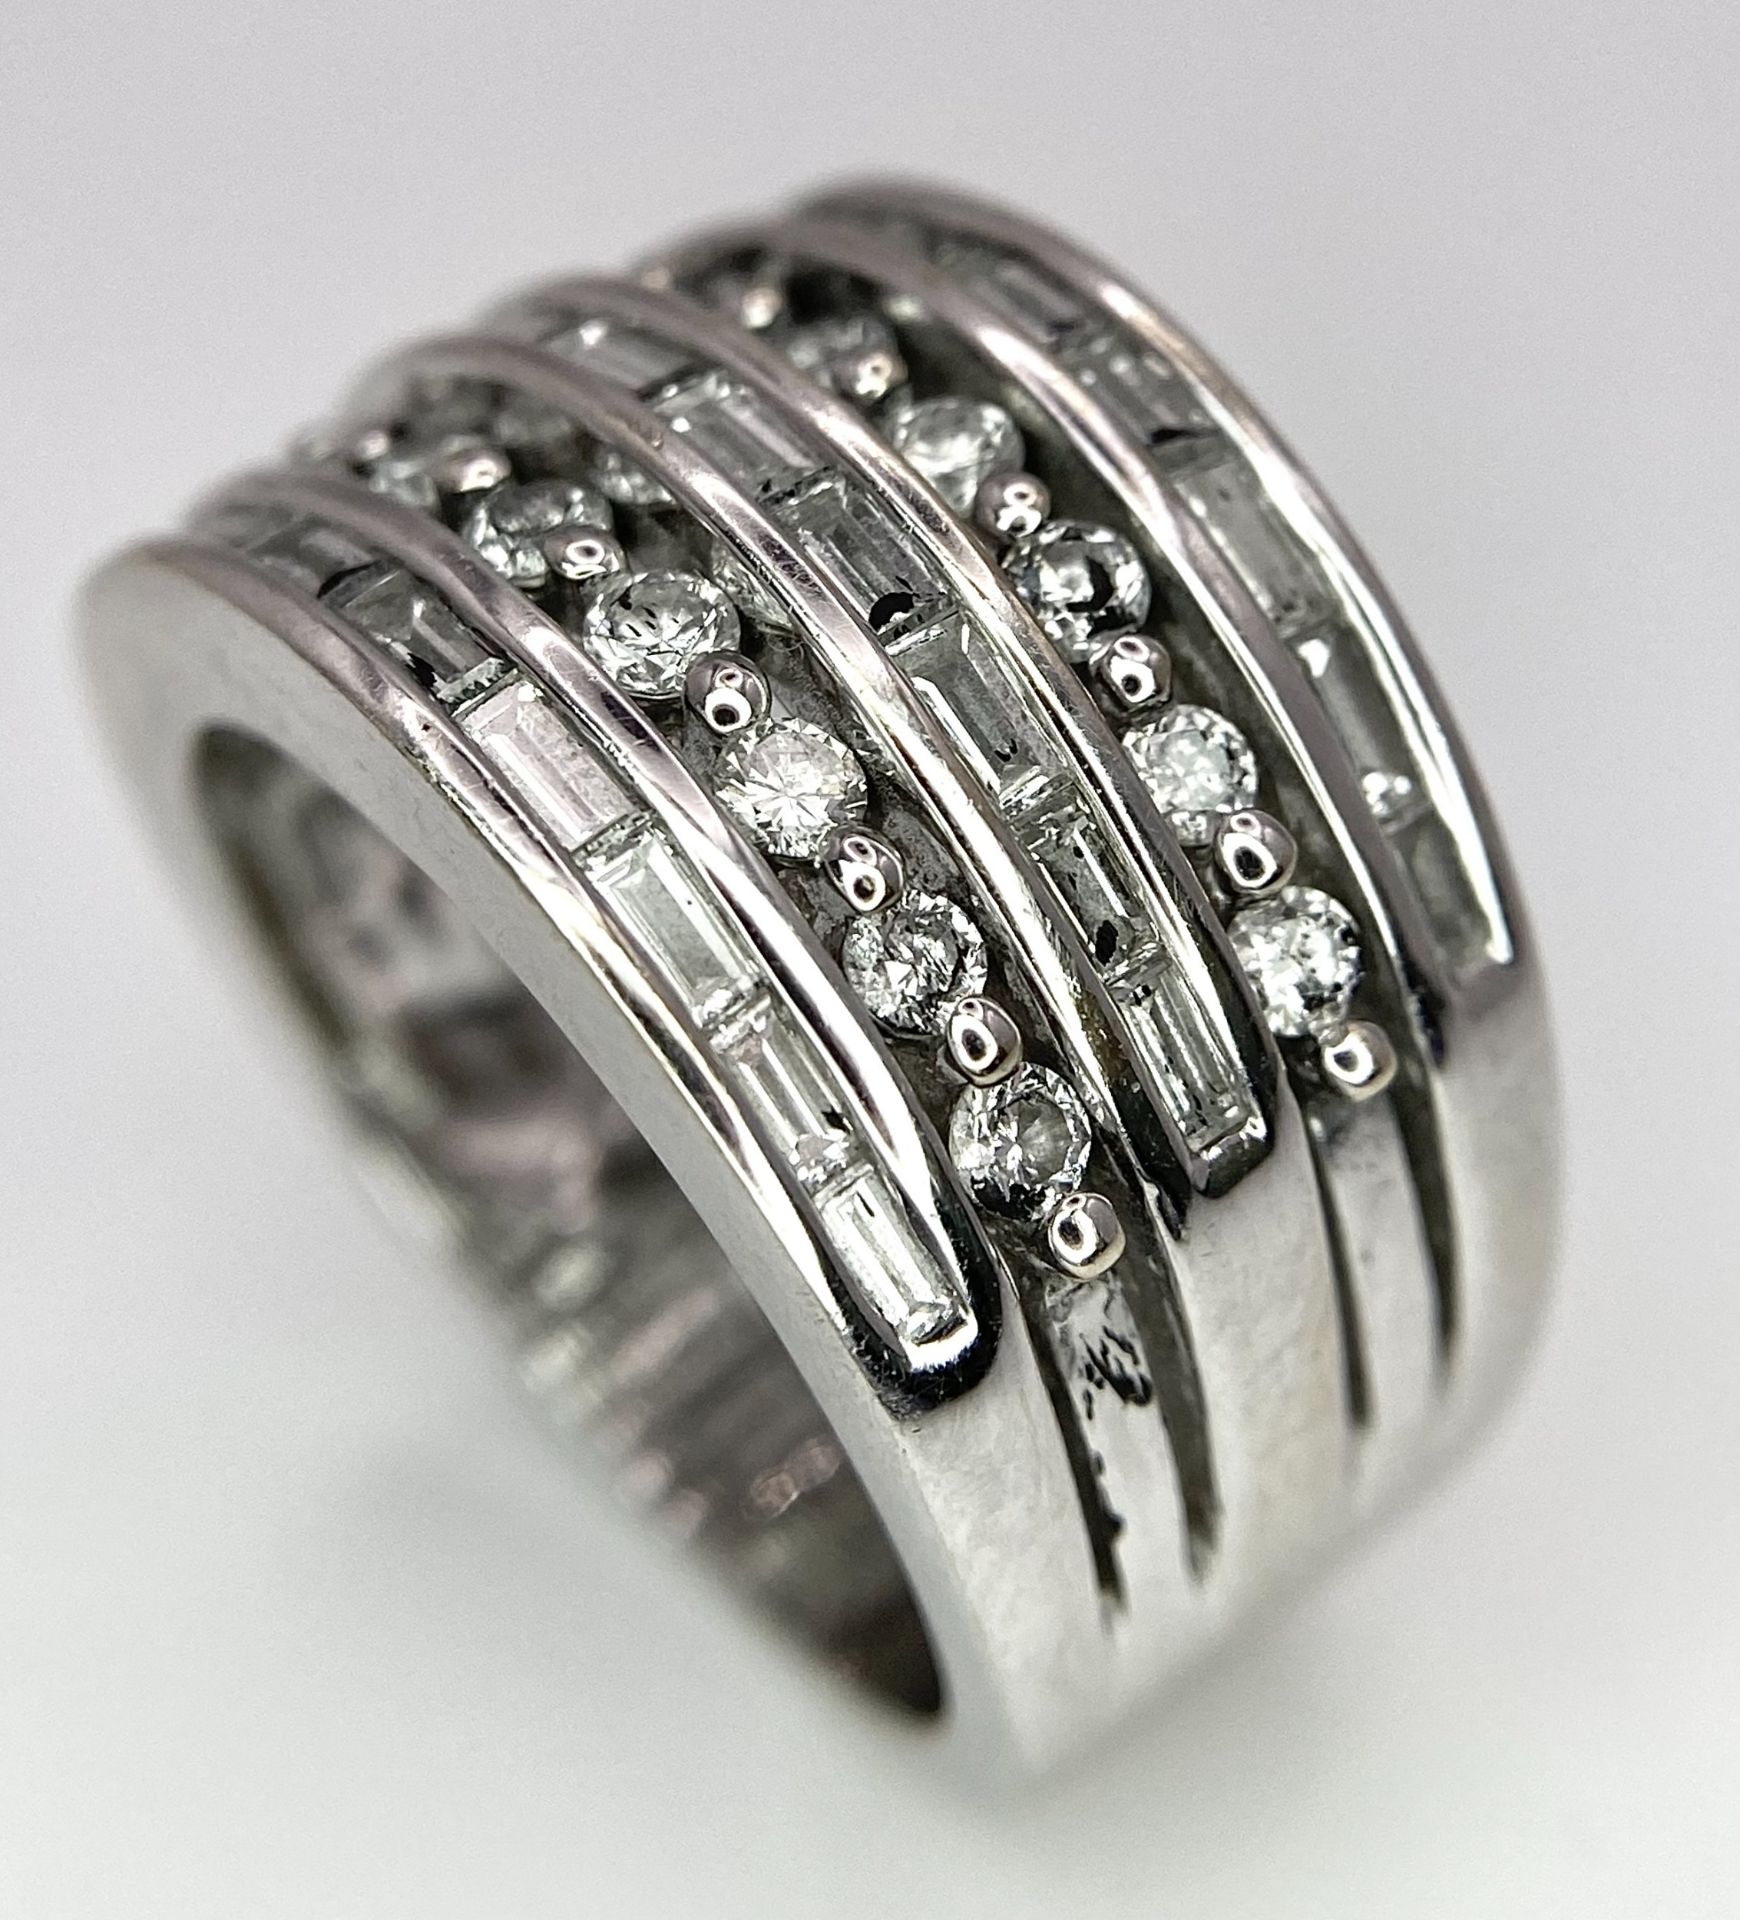 AN 18K WHITE GOLD 5 ROW DIAMOND RING. MIXTURE OF ROUND BRILLIANT CUTS AND BAGUETTE CUT DIAMONDS. - Image 5 of 9